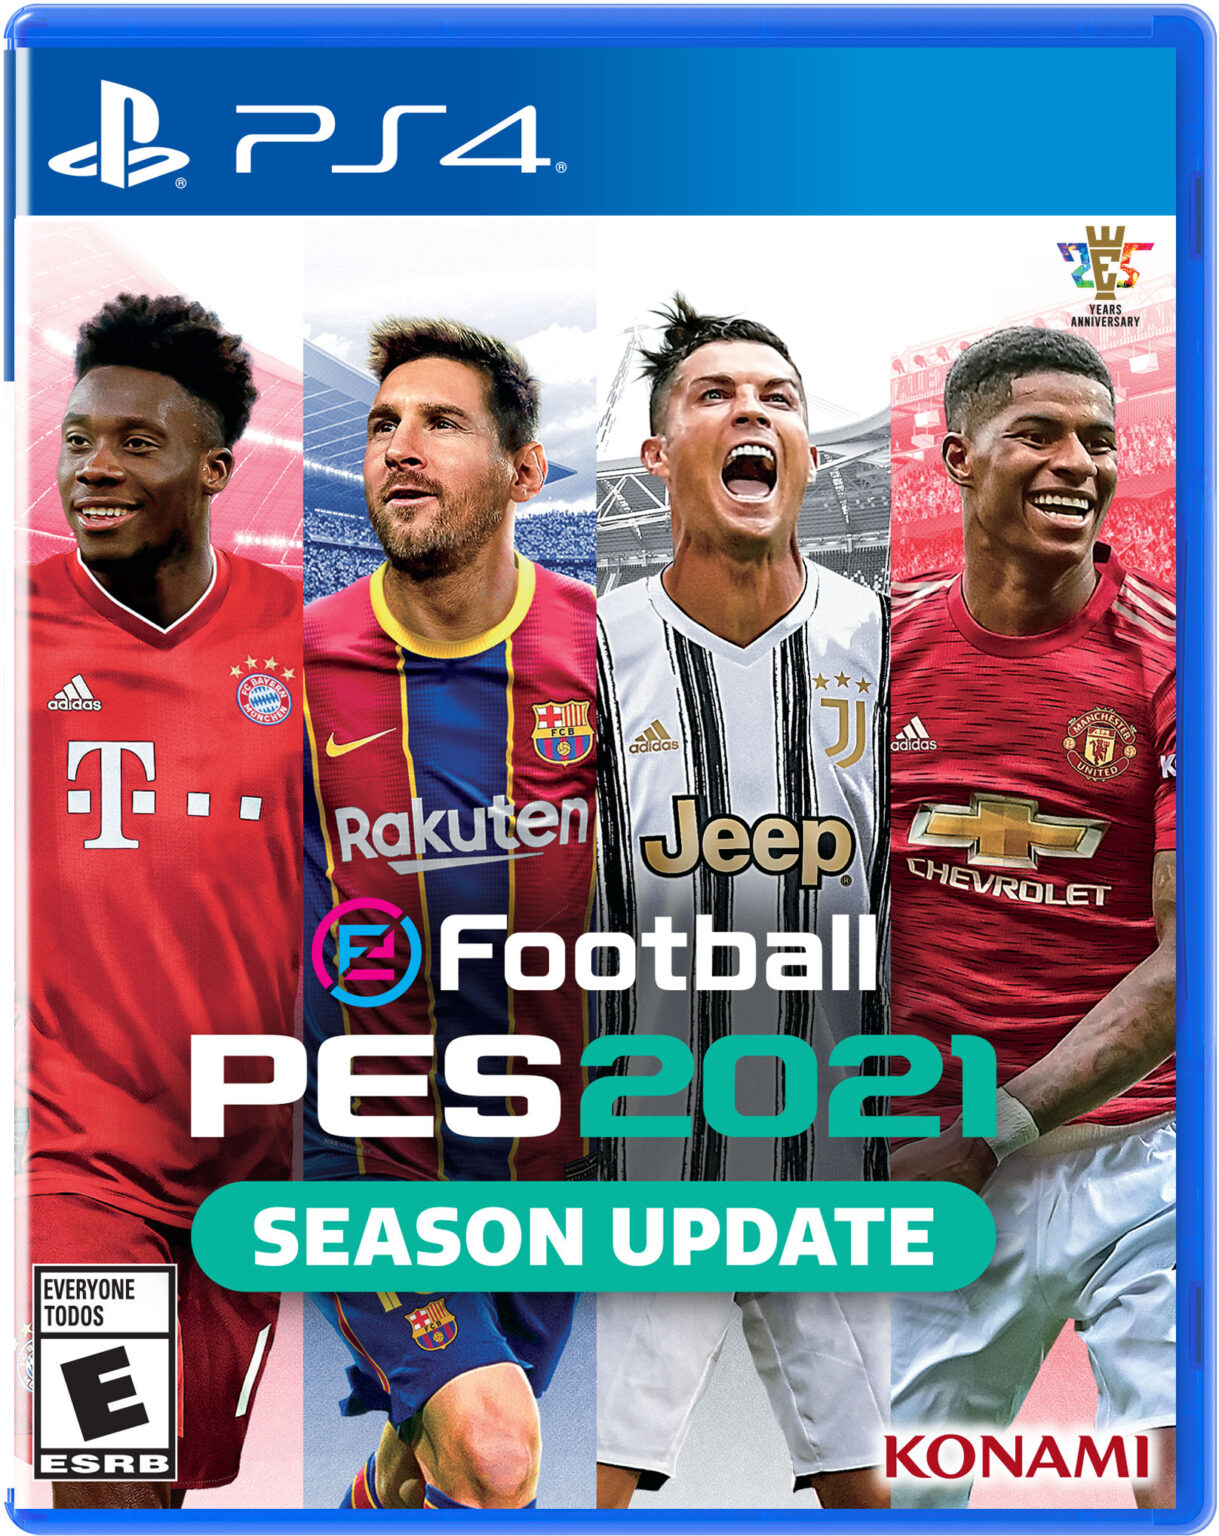 efootball pes 2021 ps5